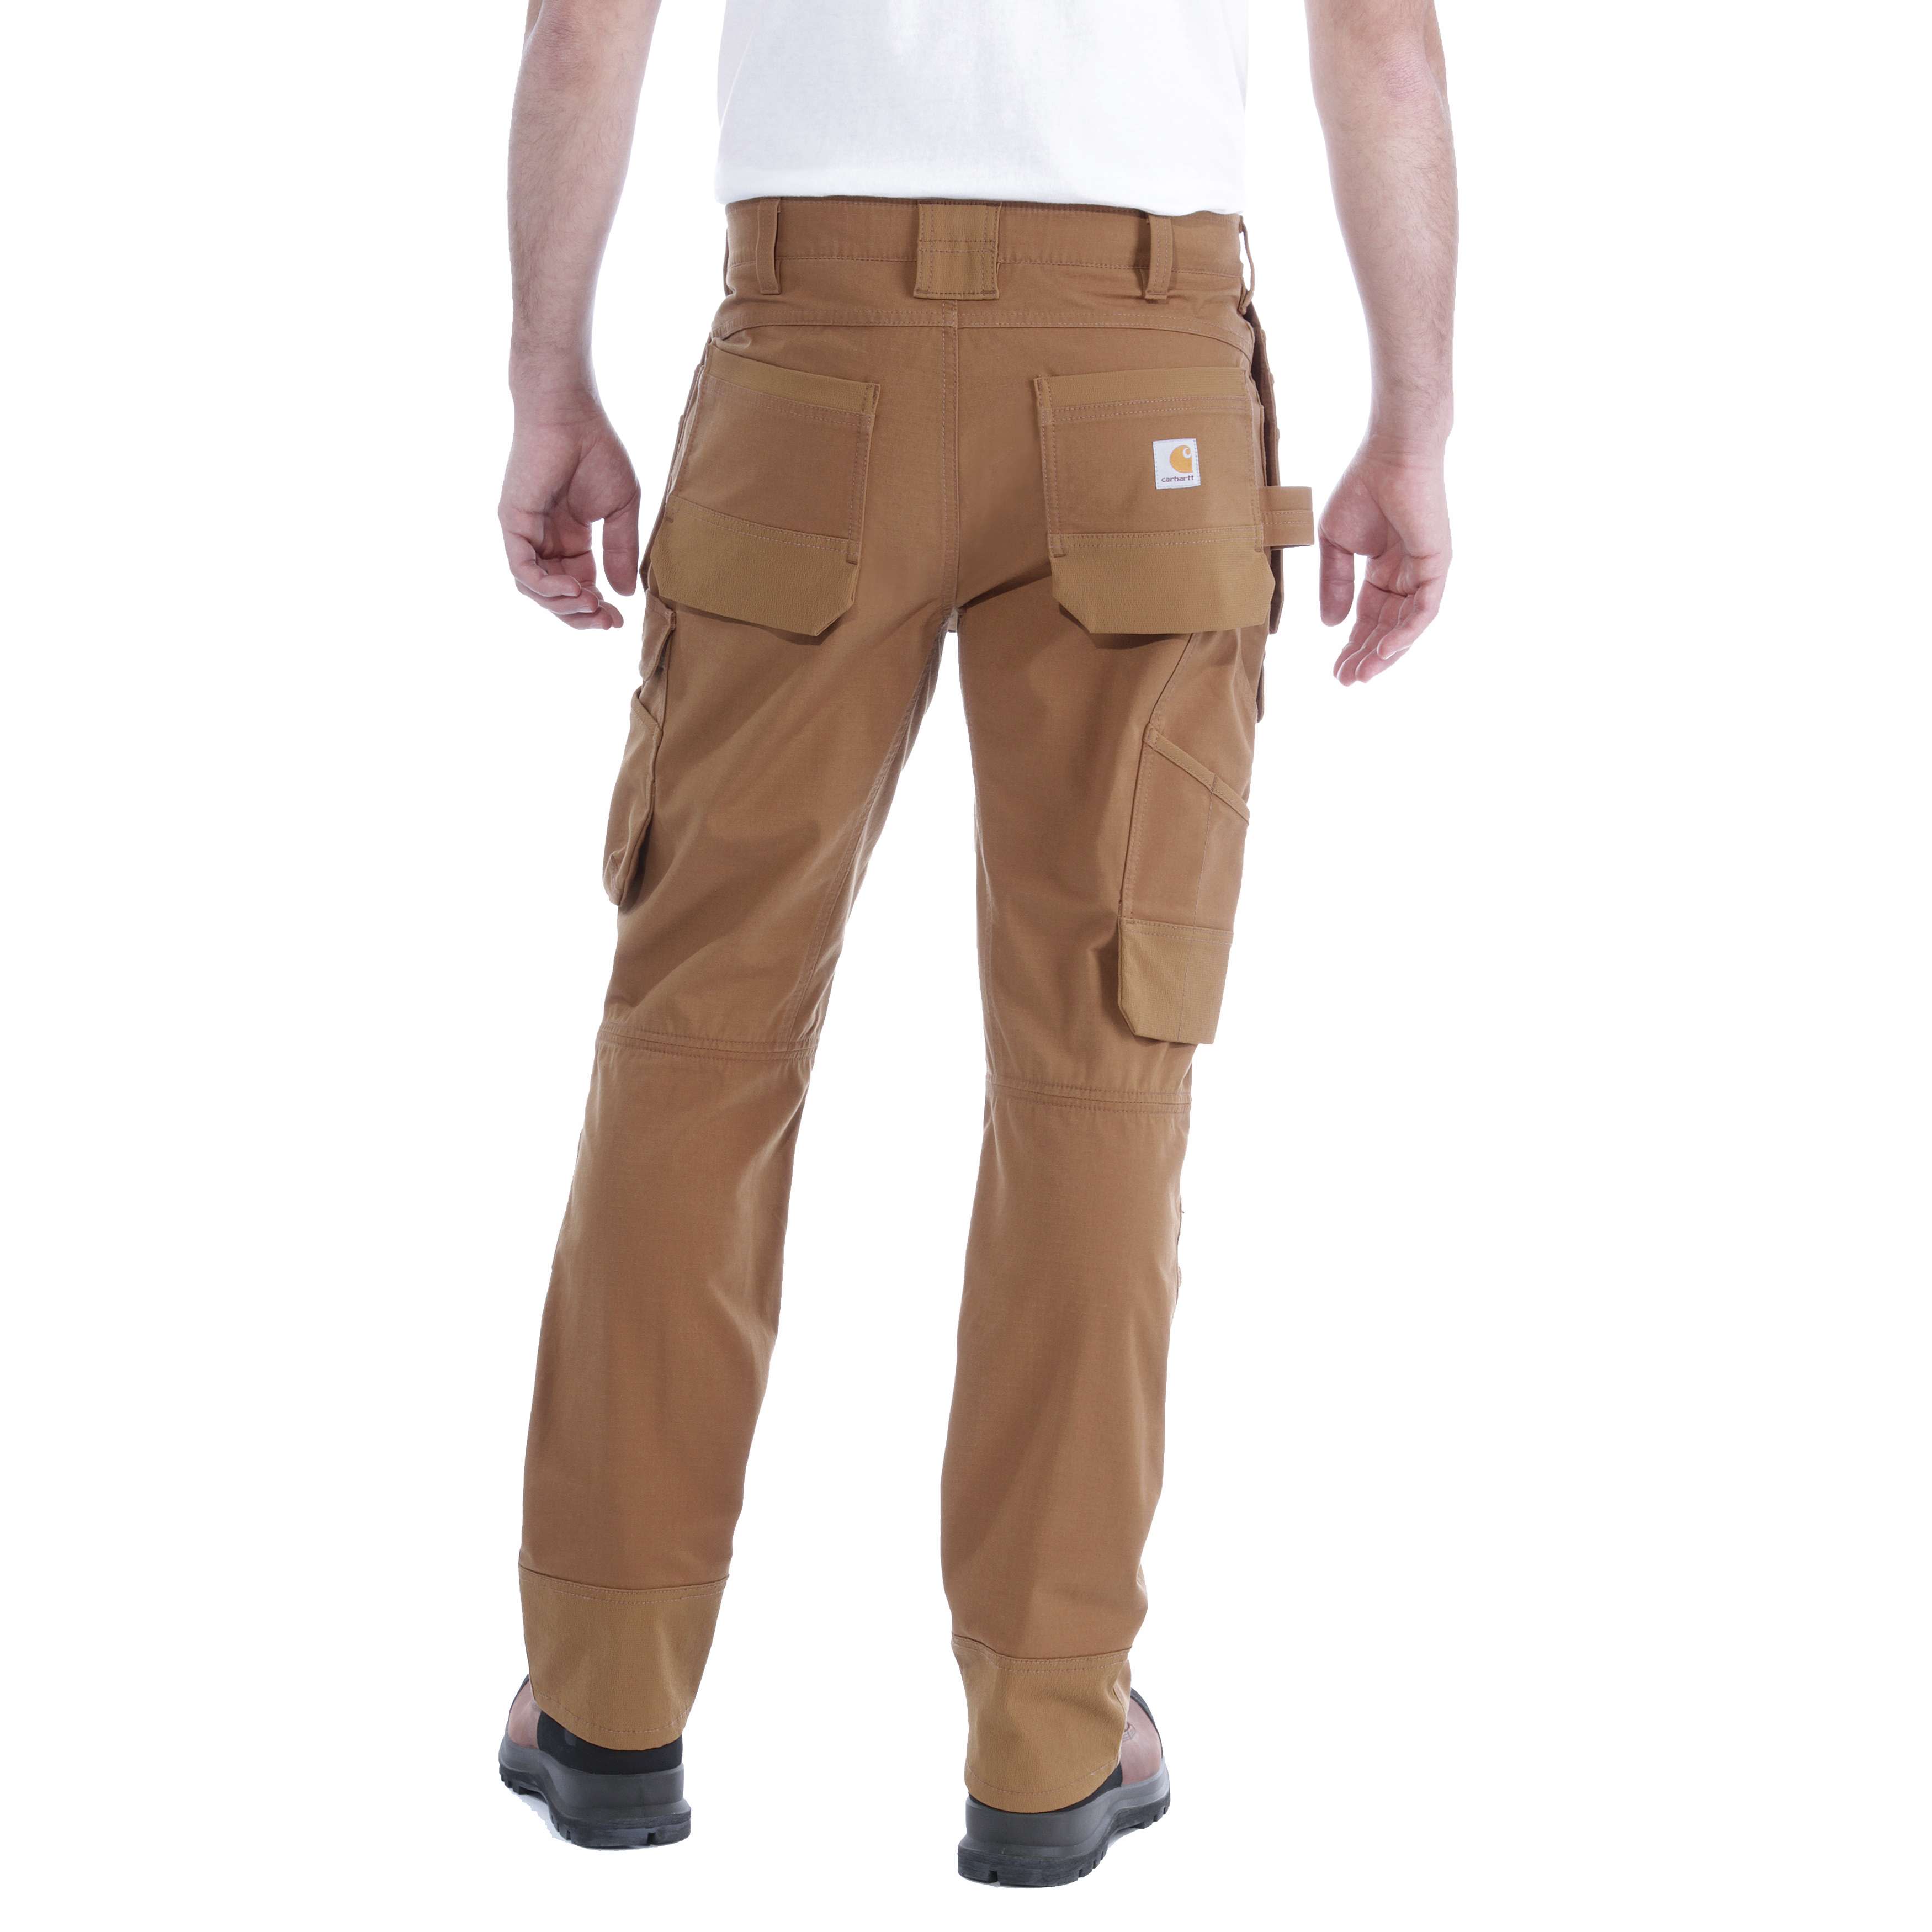 Vermont Gear - Farm-Way: Carhartt Men's Relaxed Fit Duck Utility Work Pant  - Tarmac